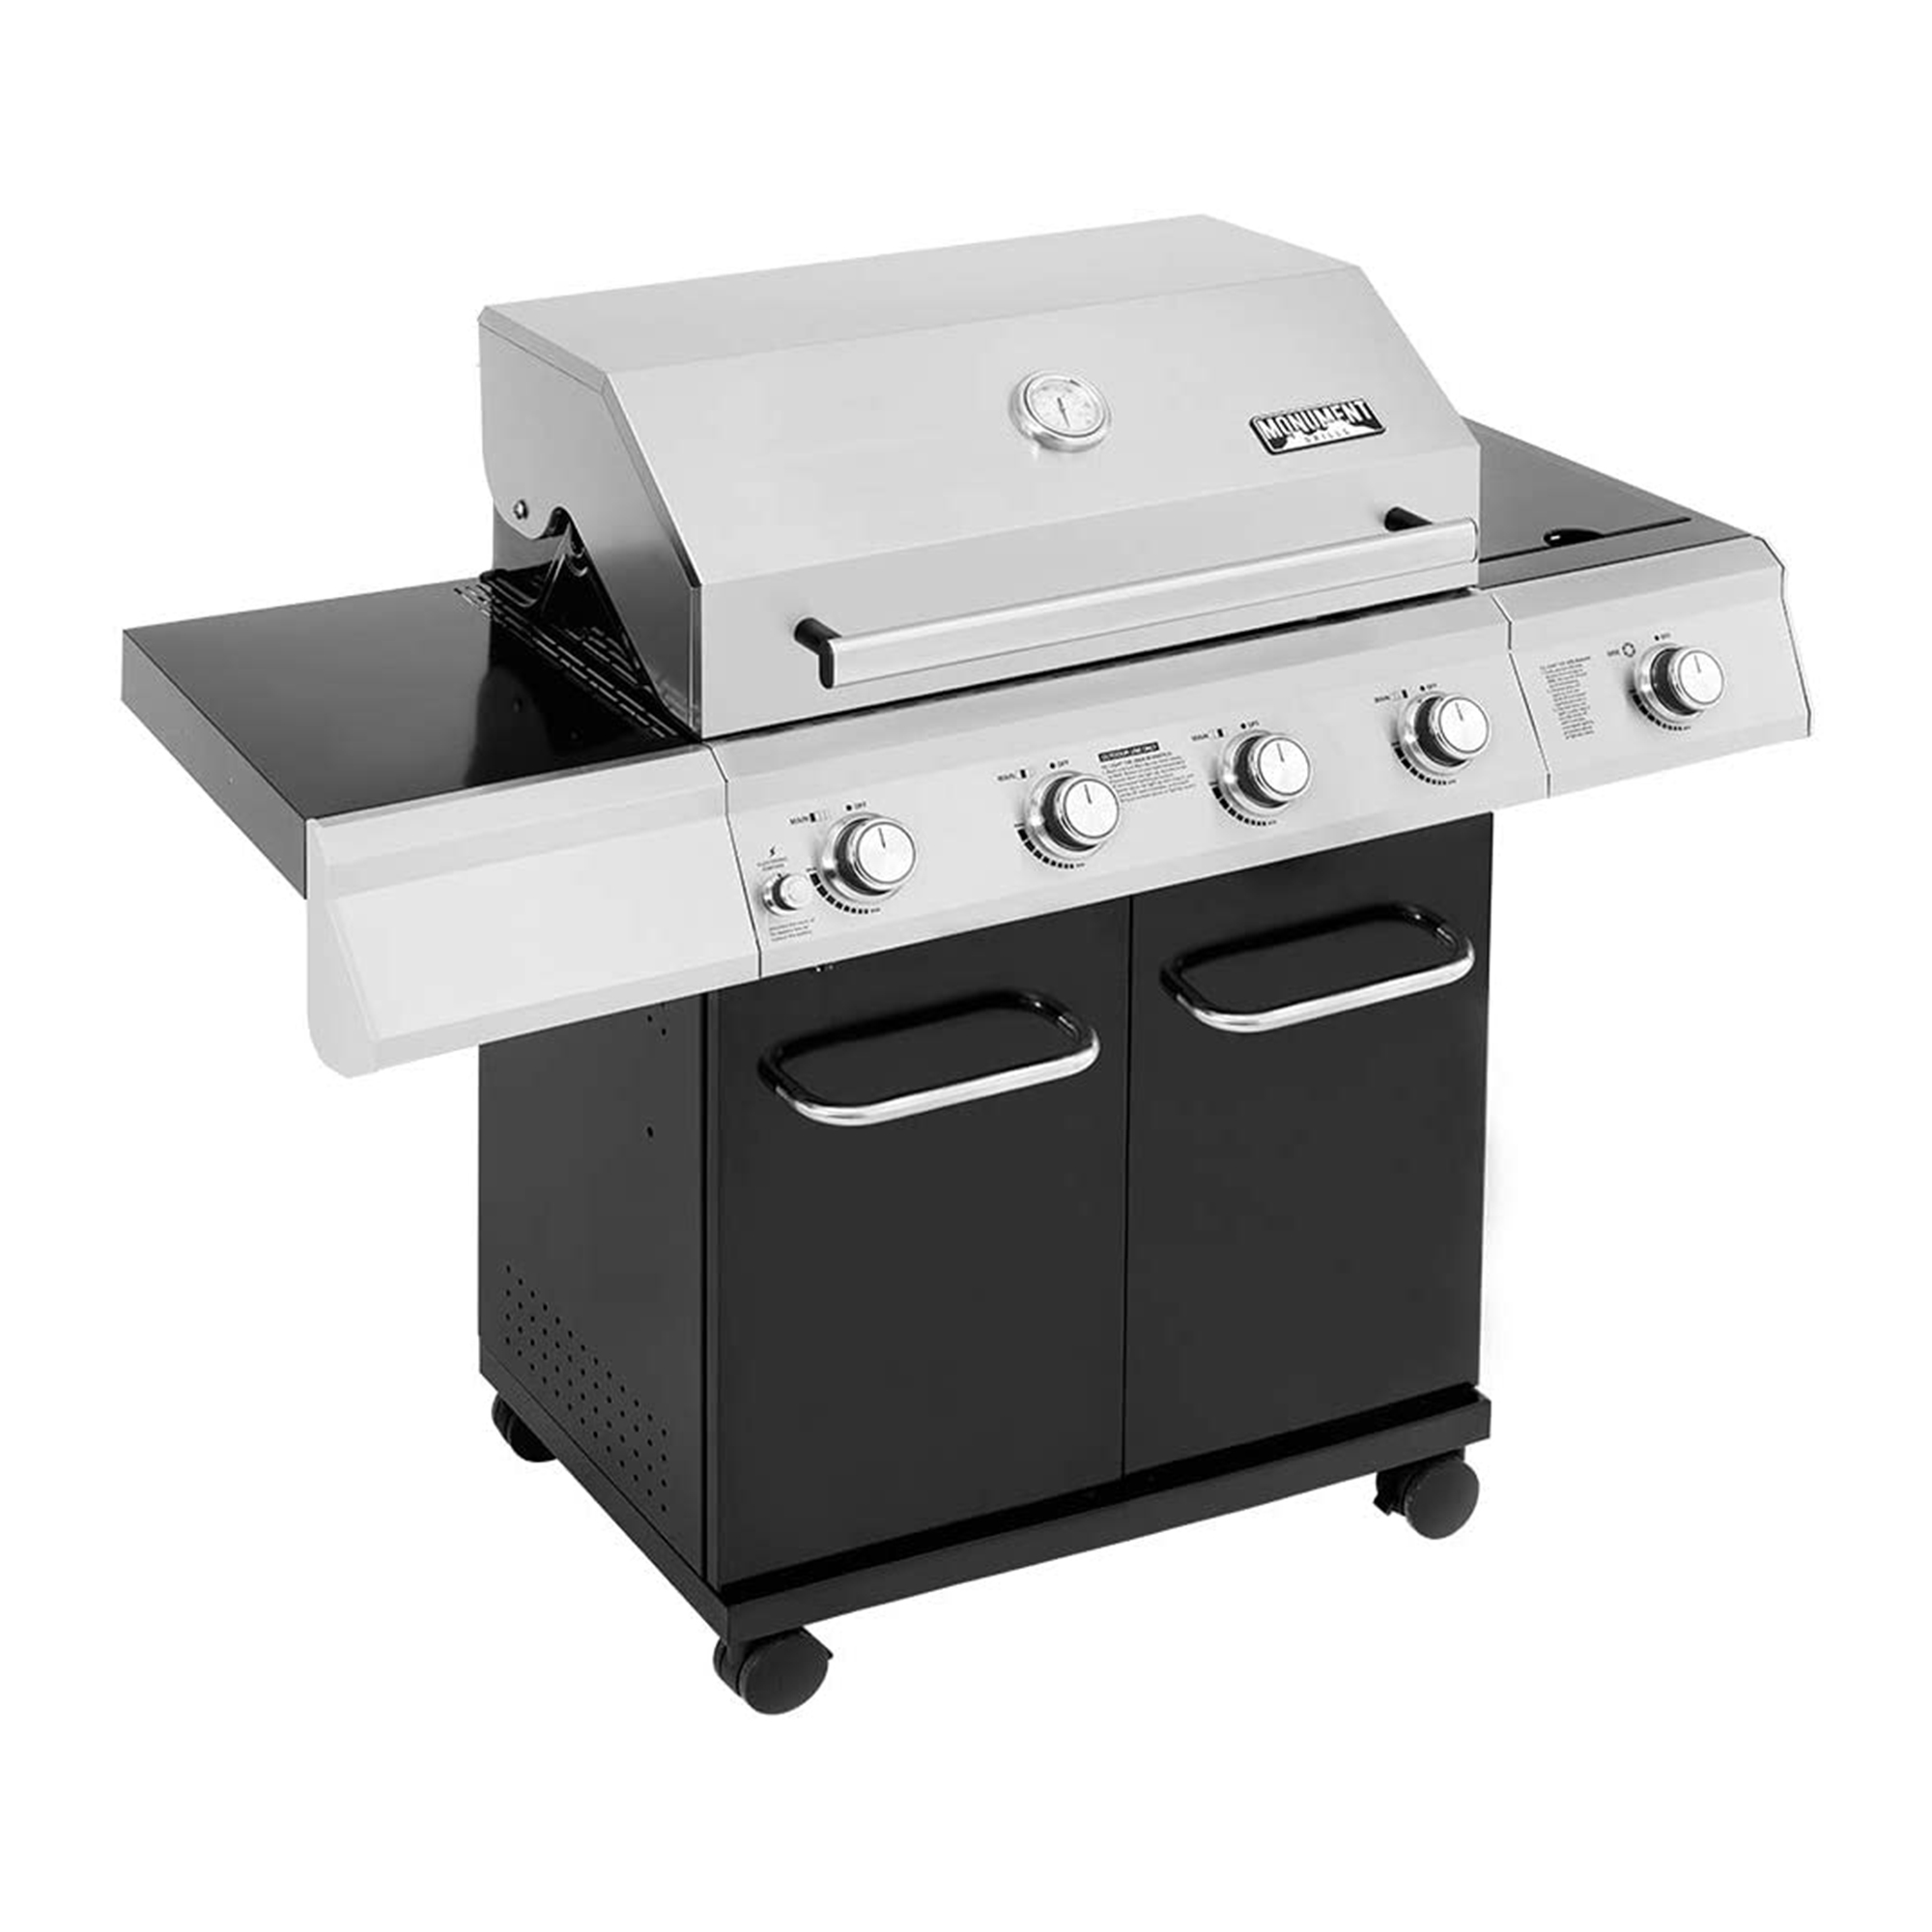 Monument Grills 4 Burner LED Control Stainless Steel Propane Gas Grill - image 1 of 6